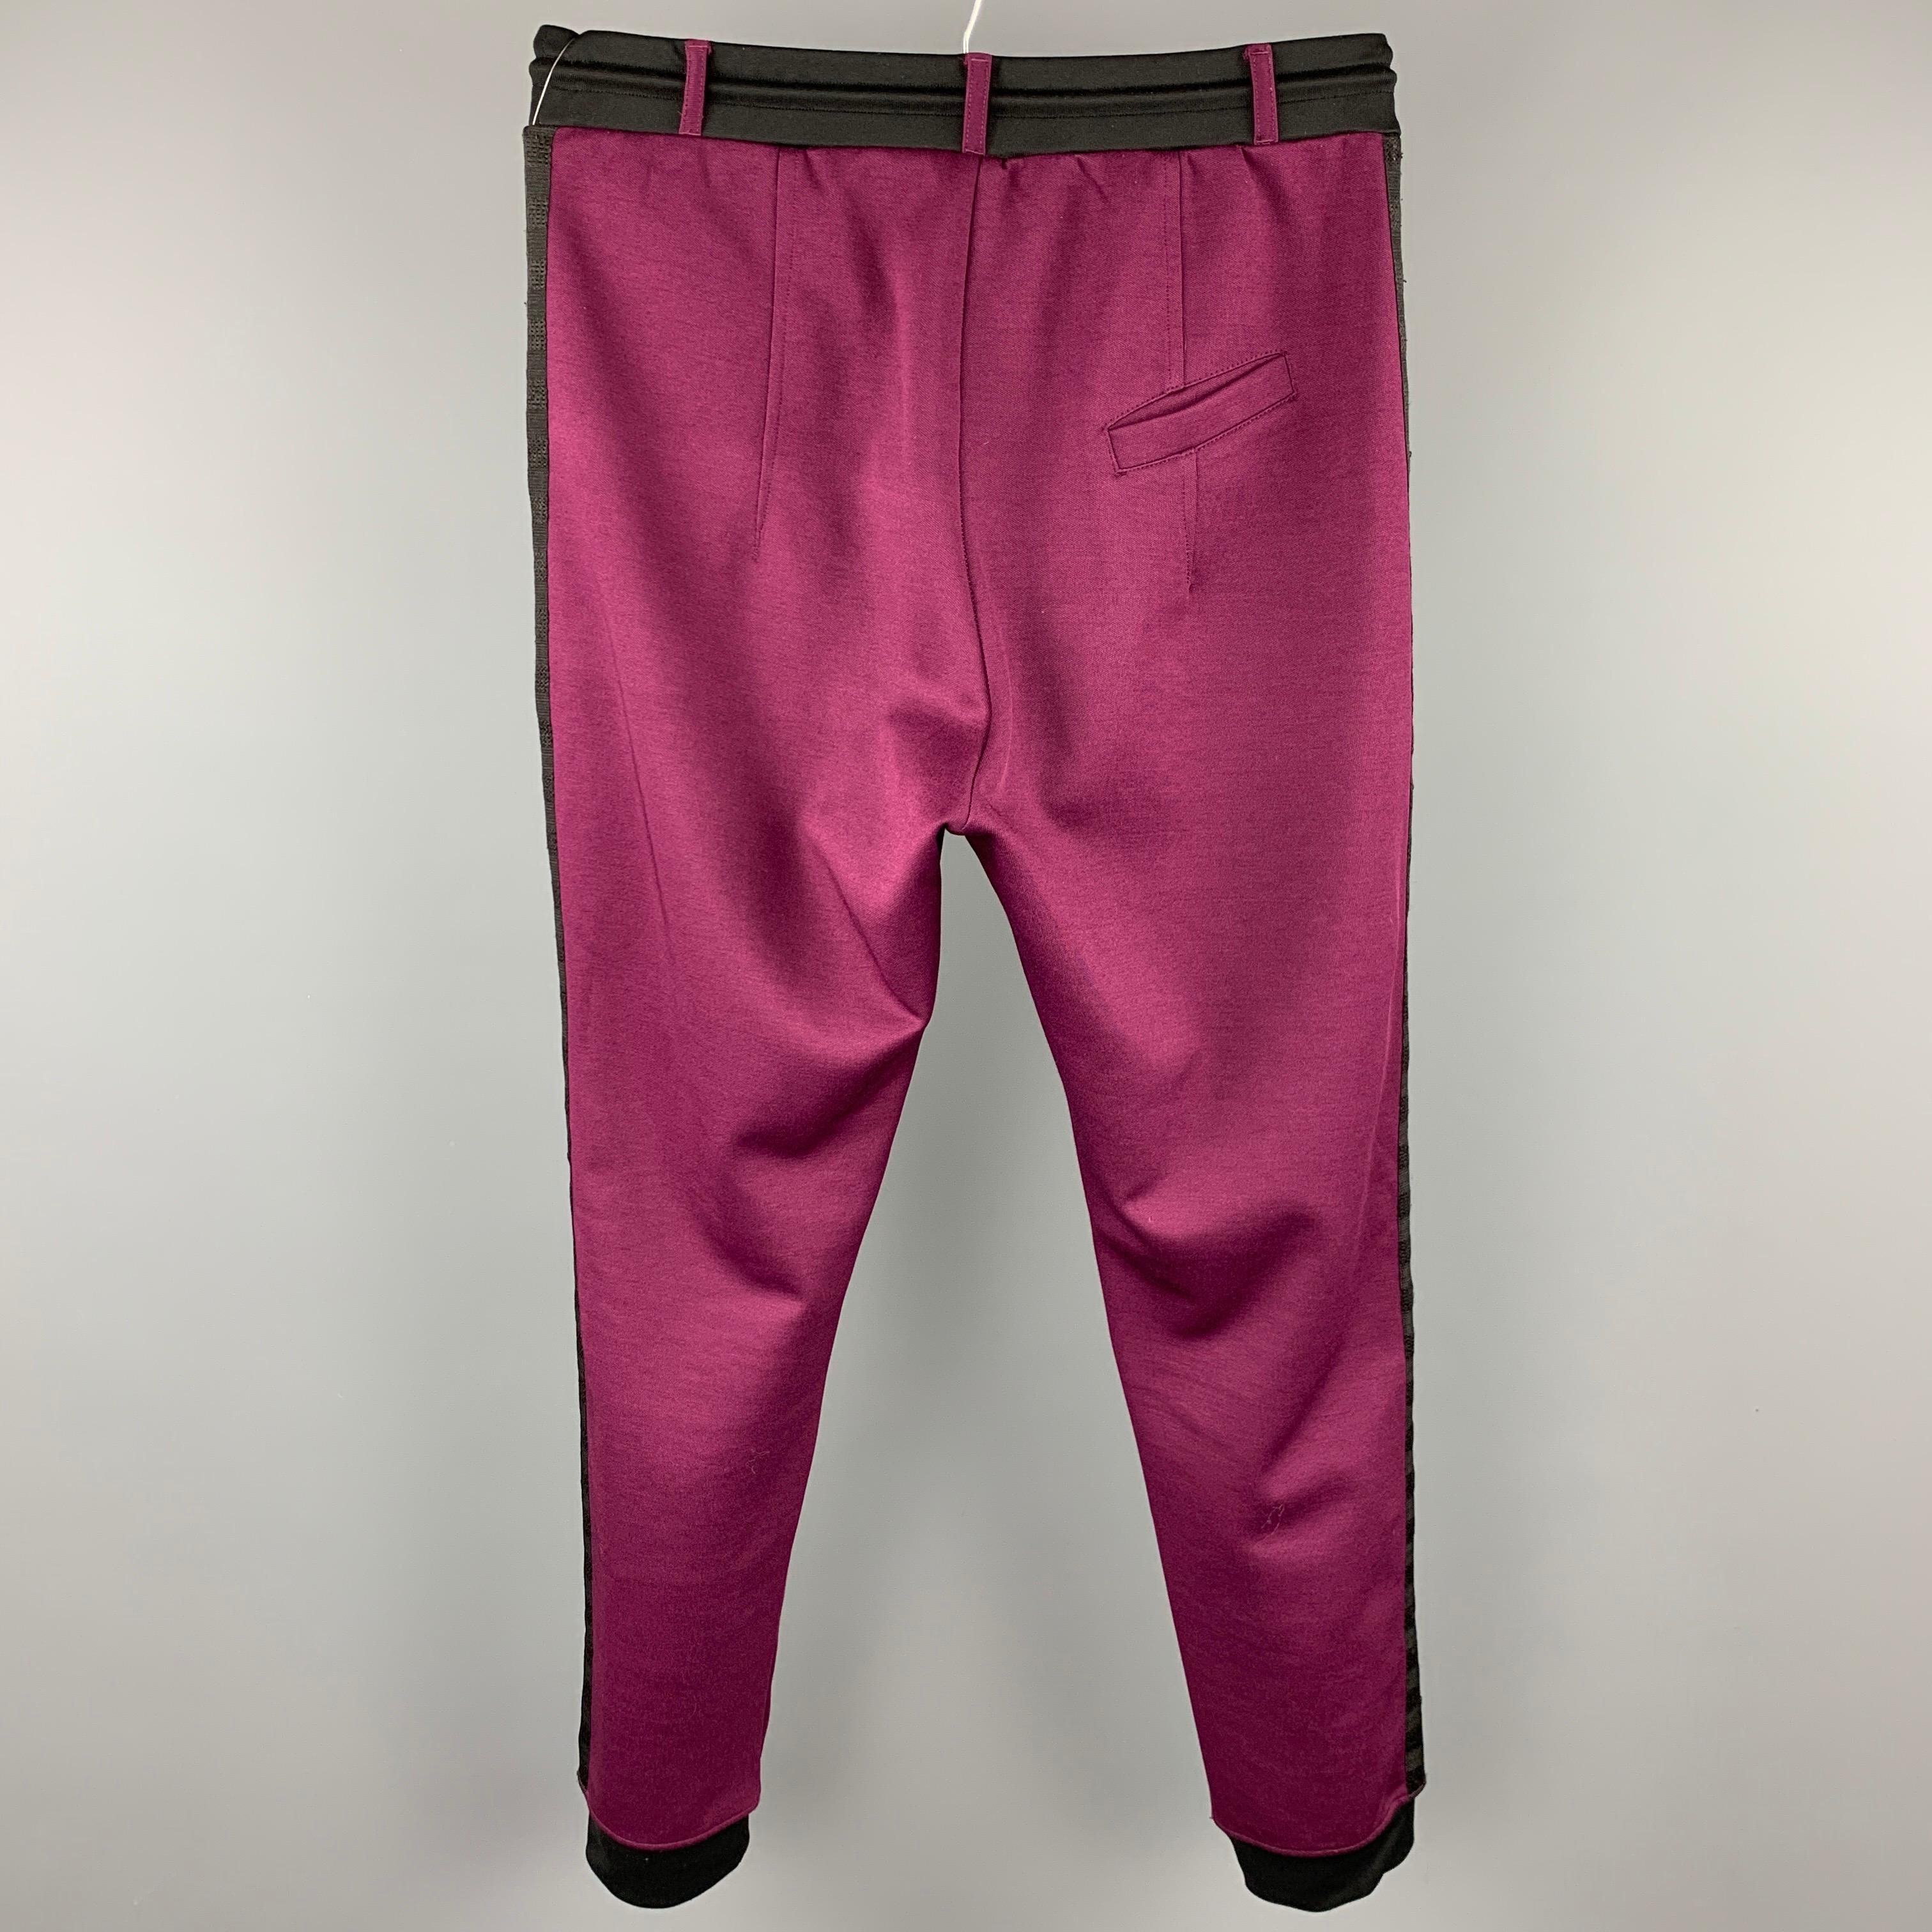 VIVIENNE WESTWOOD MAN casual pants comes in a purple & black color block cotton / polyester featuring a jogger style, elastic waistband, slit pockets, button fly, and a drawstring. 

Very Good Pre-Owned Condition.
Marked: L

Measurements:

Waist: 32